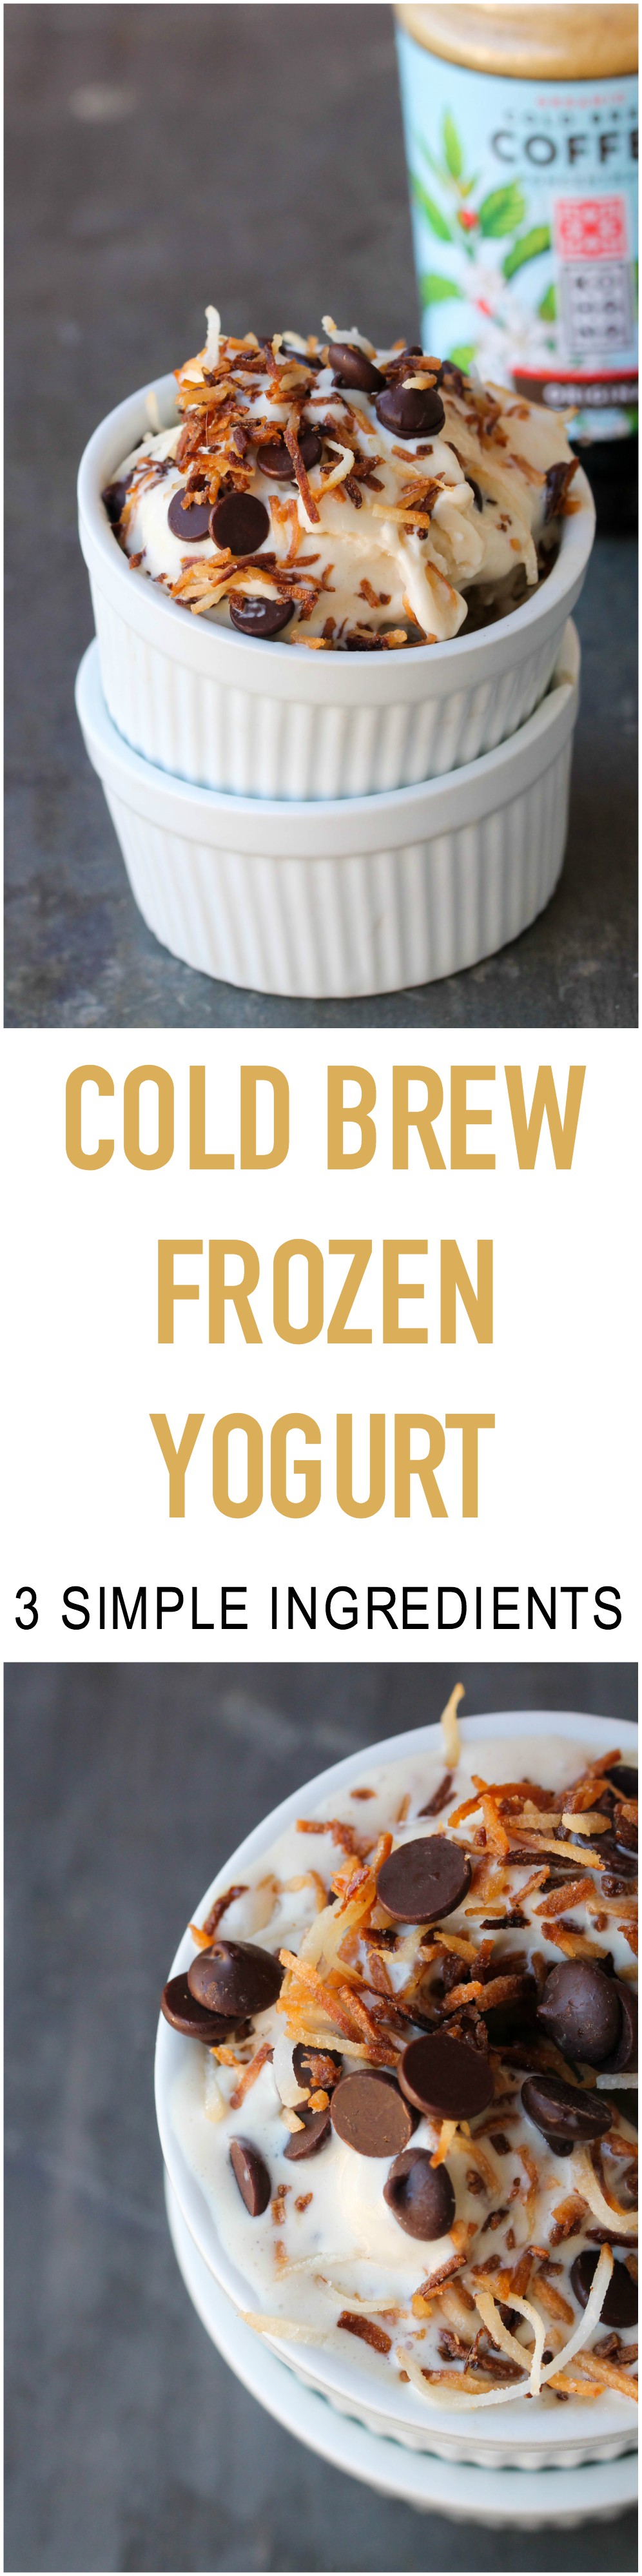 Cold Brew Froyo made with 3 simple ingredients: yogurt, cold brew coffee, and naturally sweetened with honey.